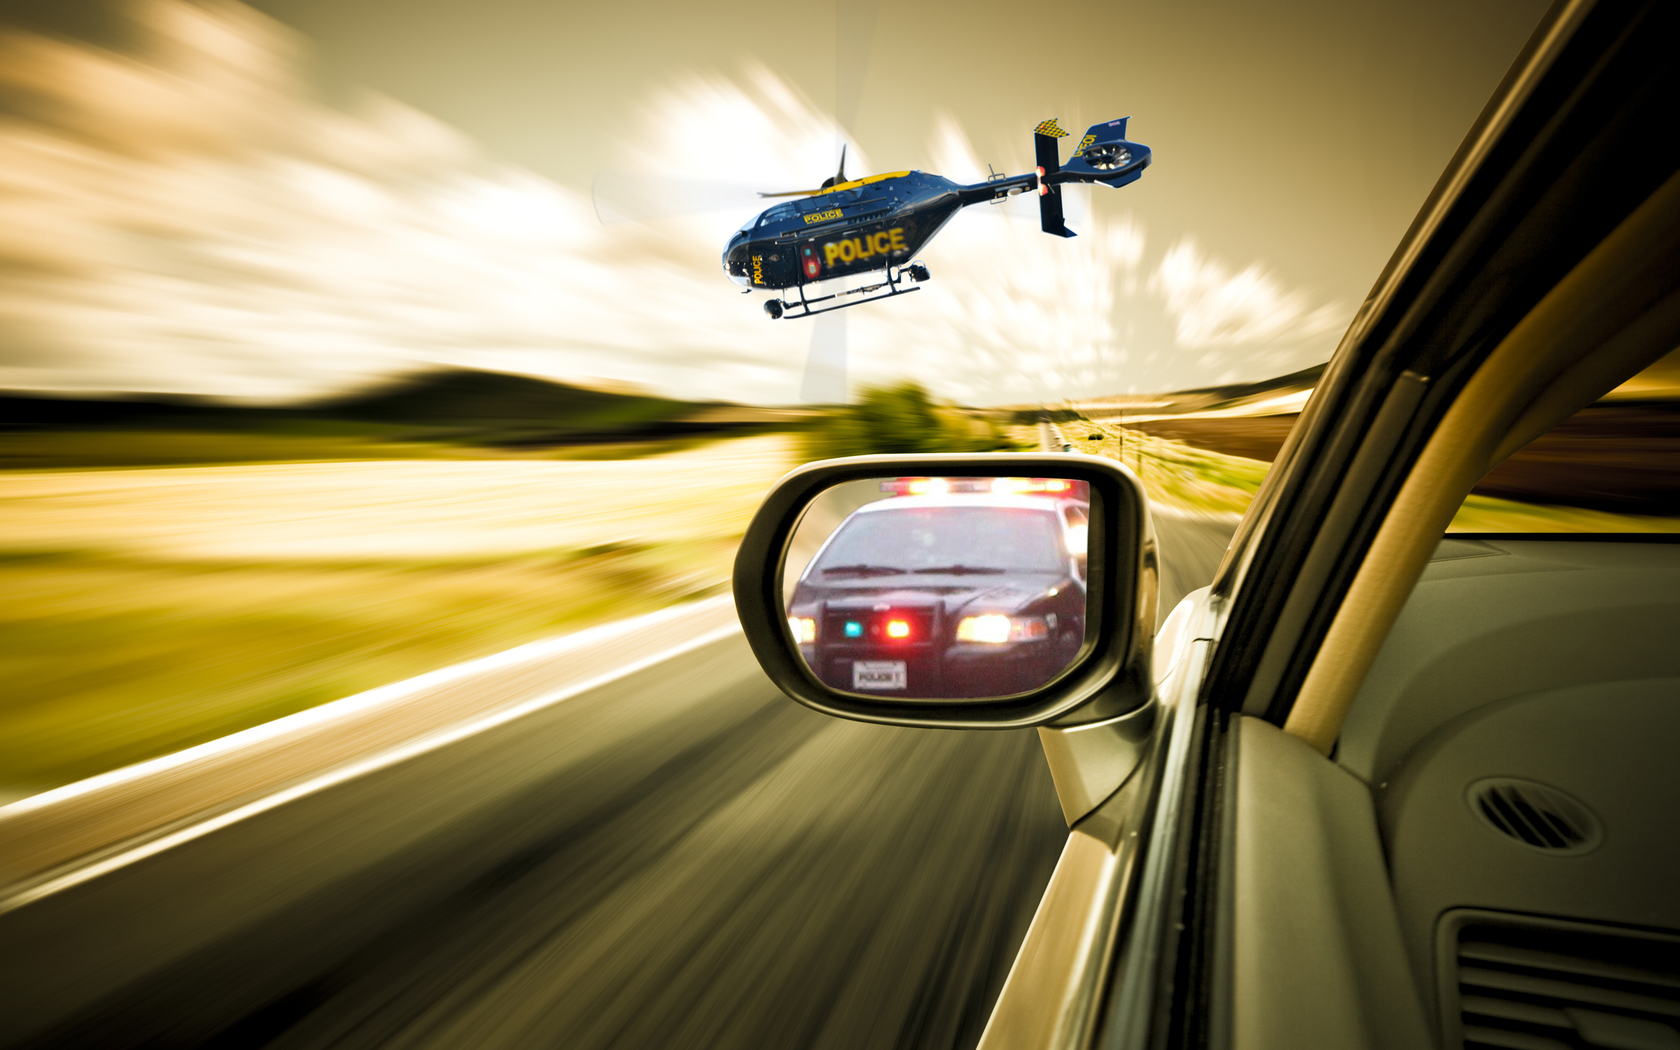 need for speed, Games, Action, Video games, Cars, Vehicles, Police, Helicopters, Crime Wallpaper